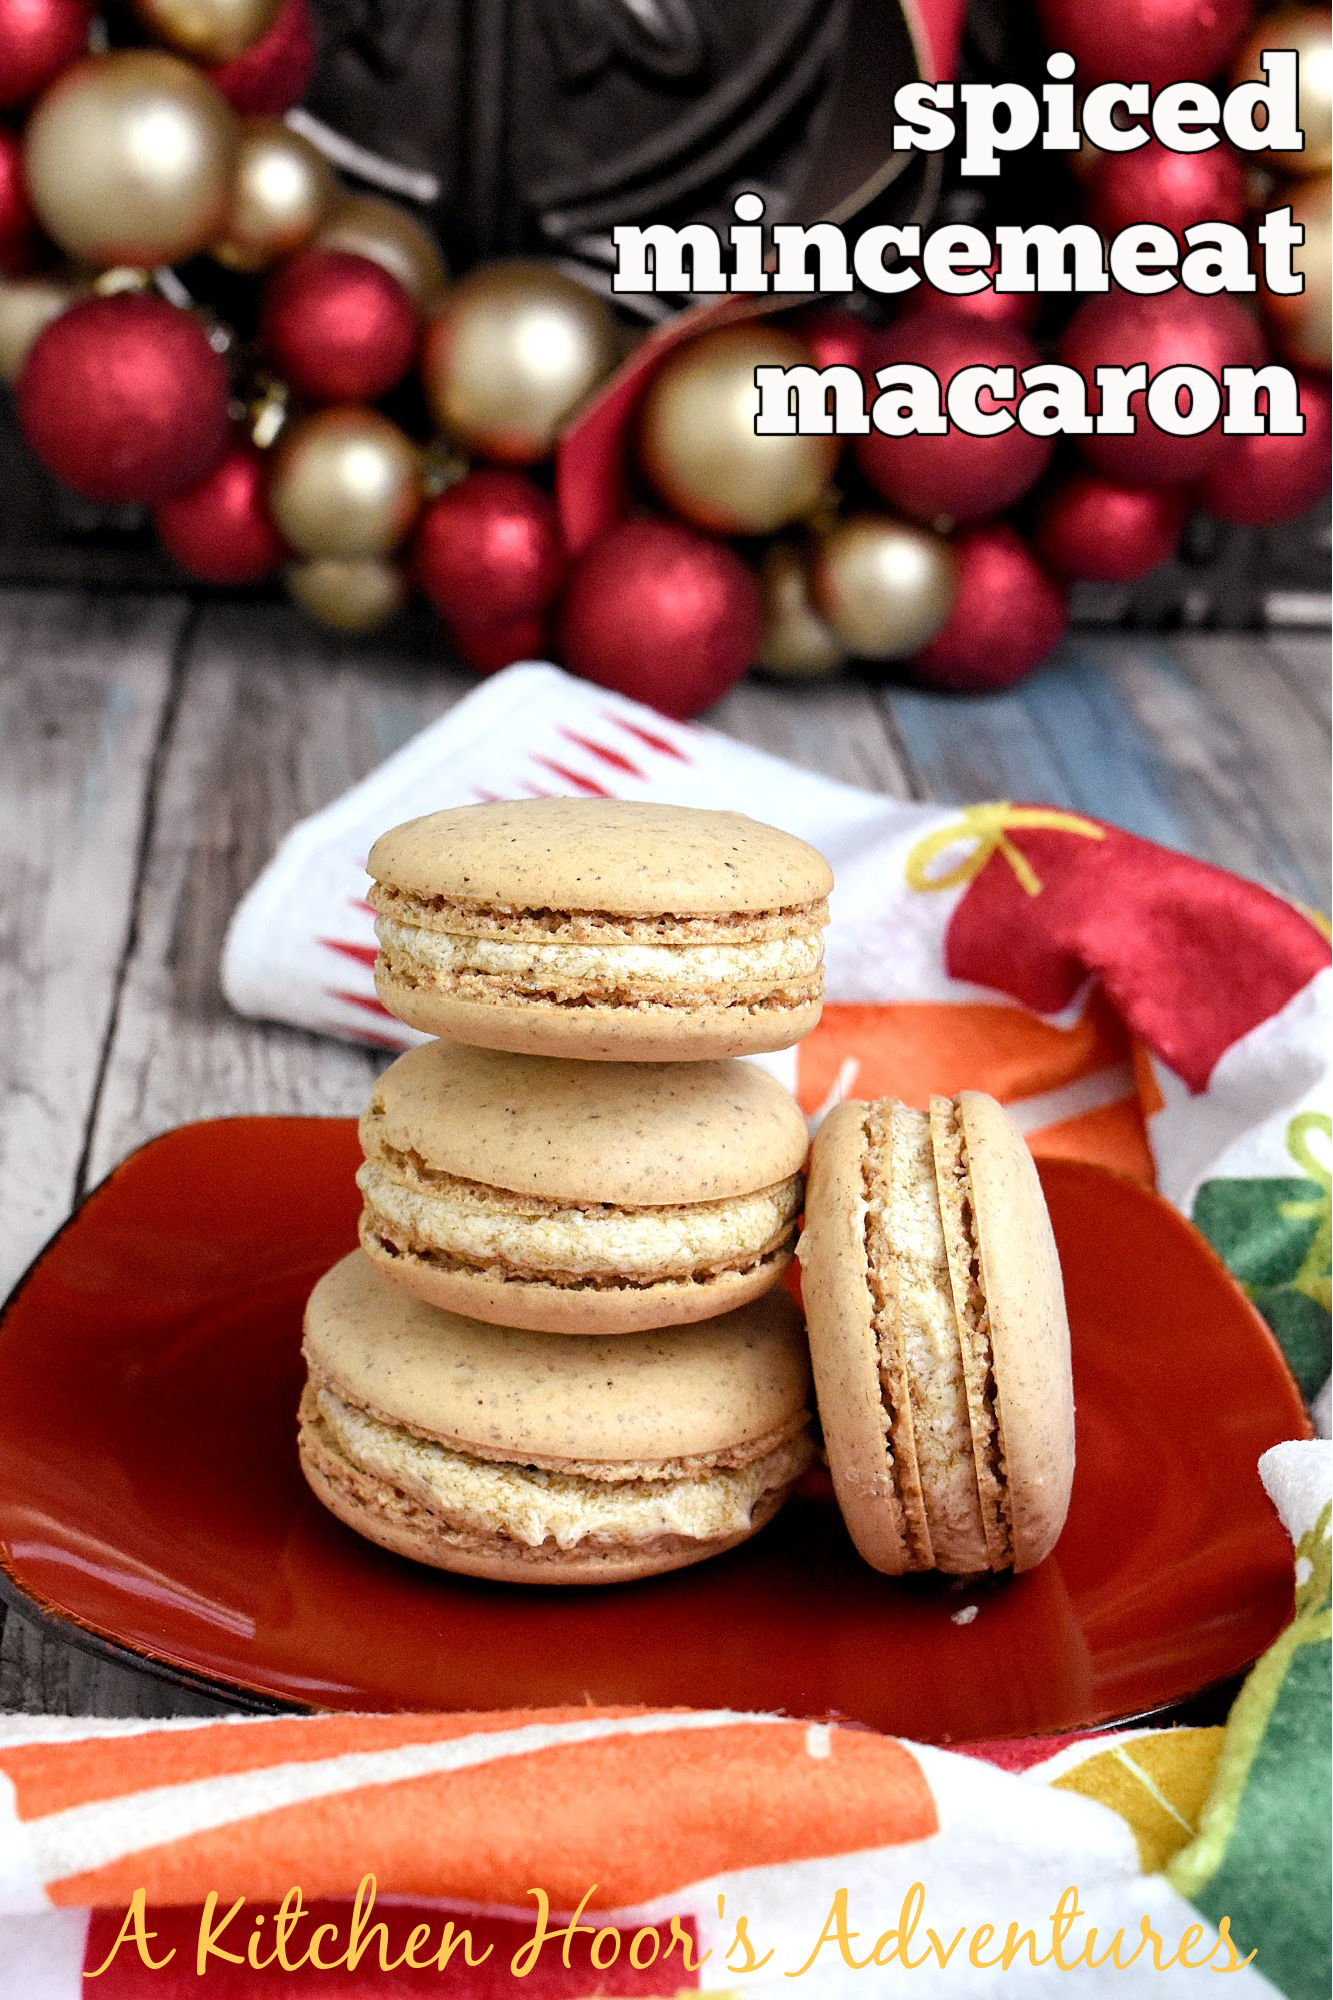 Treat yourself to something special! Spiced Mincemeat Macaron! It has a creamy filling and zesty flavors that will knock your socks off this holiday season! #ChristmasSweets #MacaronMastery #SpicedMincemeat #RecipeOfTheDay #HomeBaker #InstaDelicious